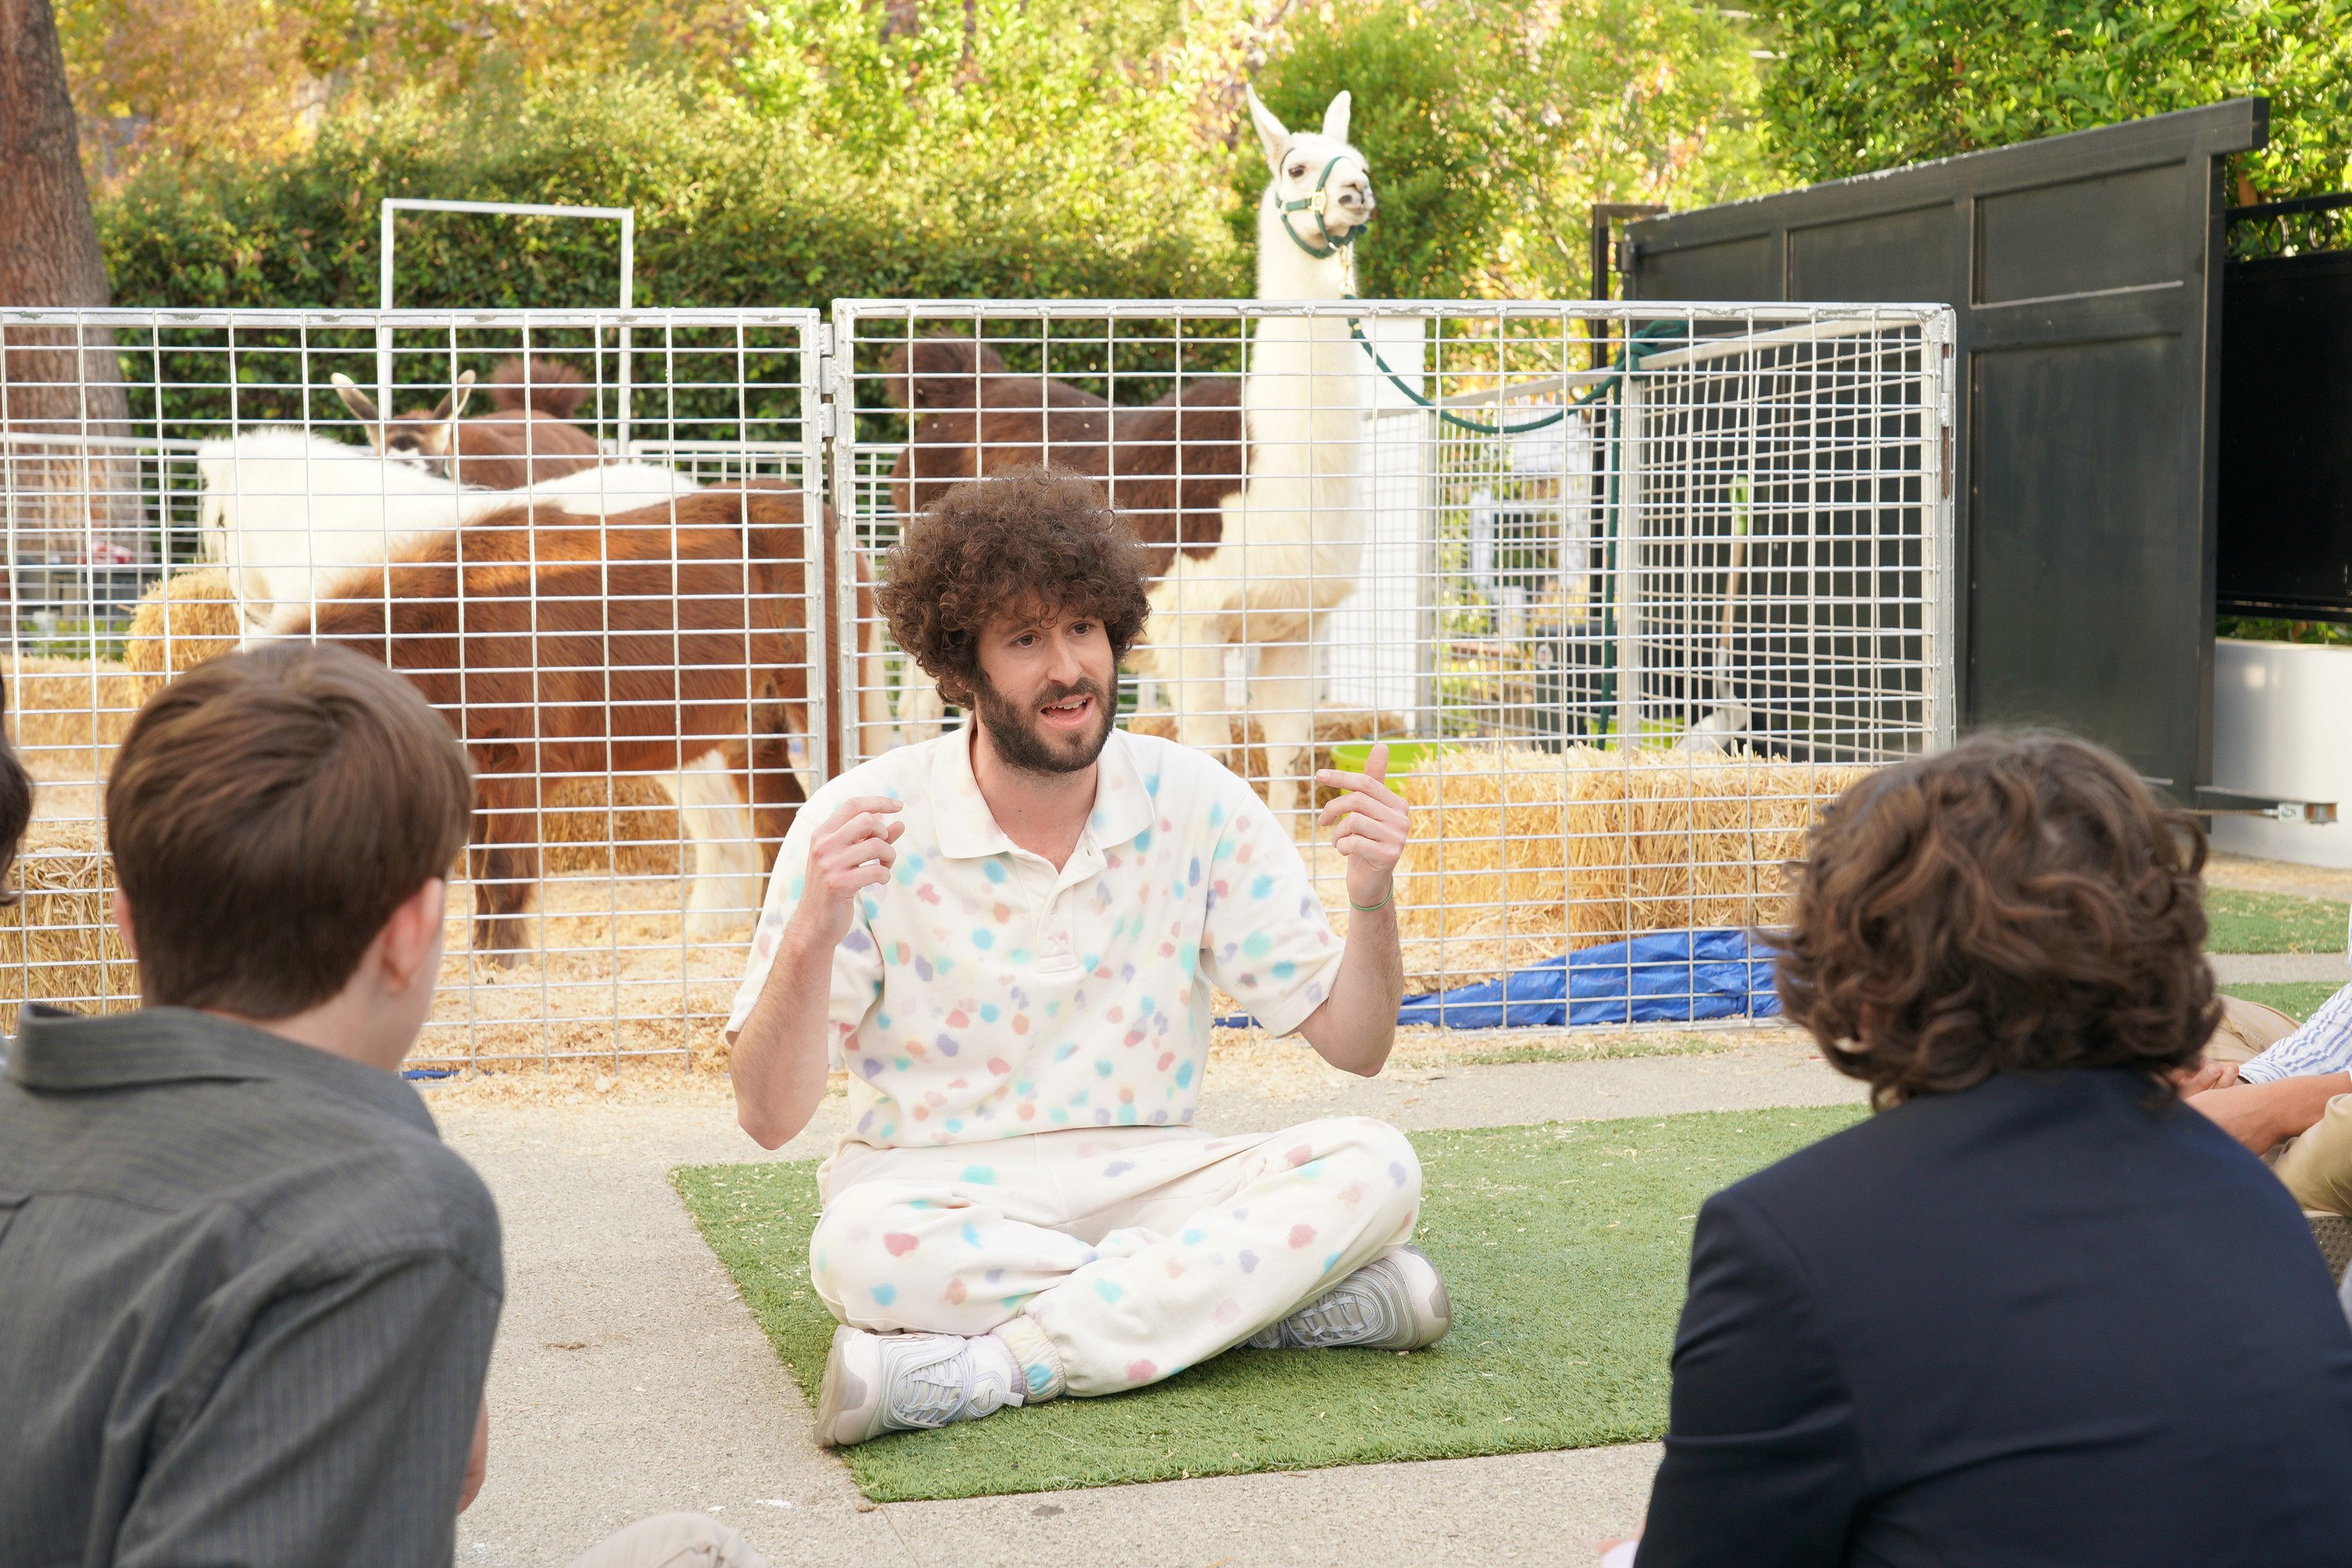 Dave 'Lil Dicky' Burd in the 'Bar Mitzvah' episode of season 2 of 'Dave'